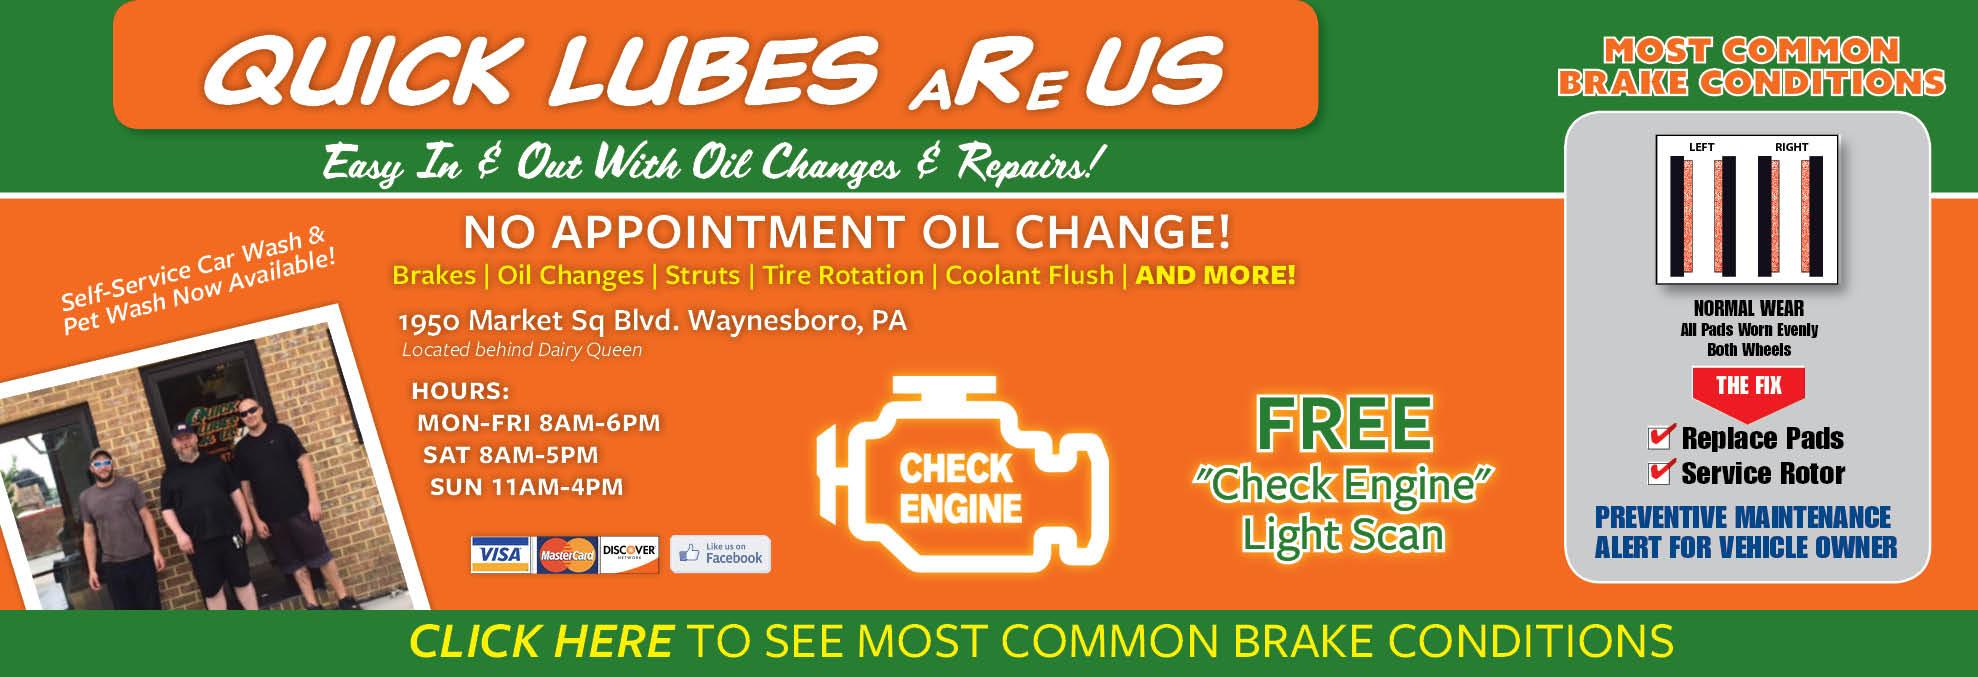 Quick Lubes aRe Us in Waynesboro, PA Local Coupons July 2020